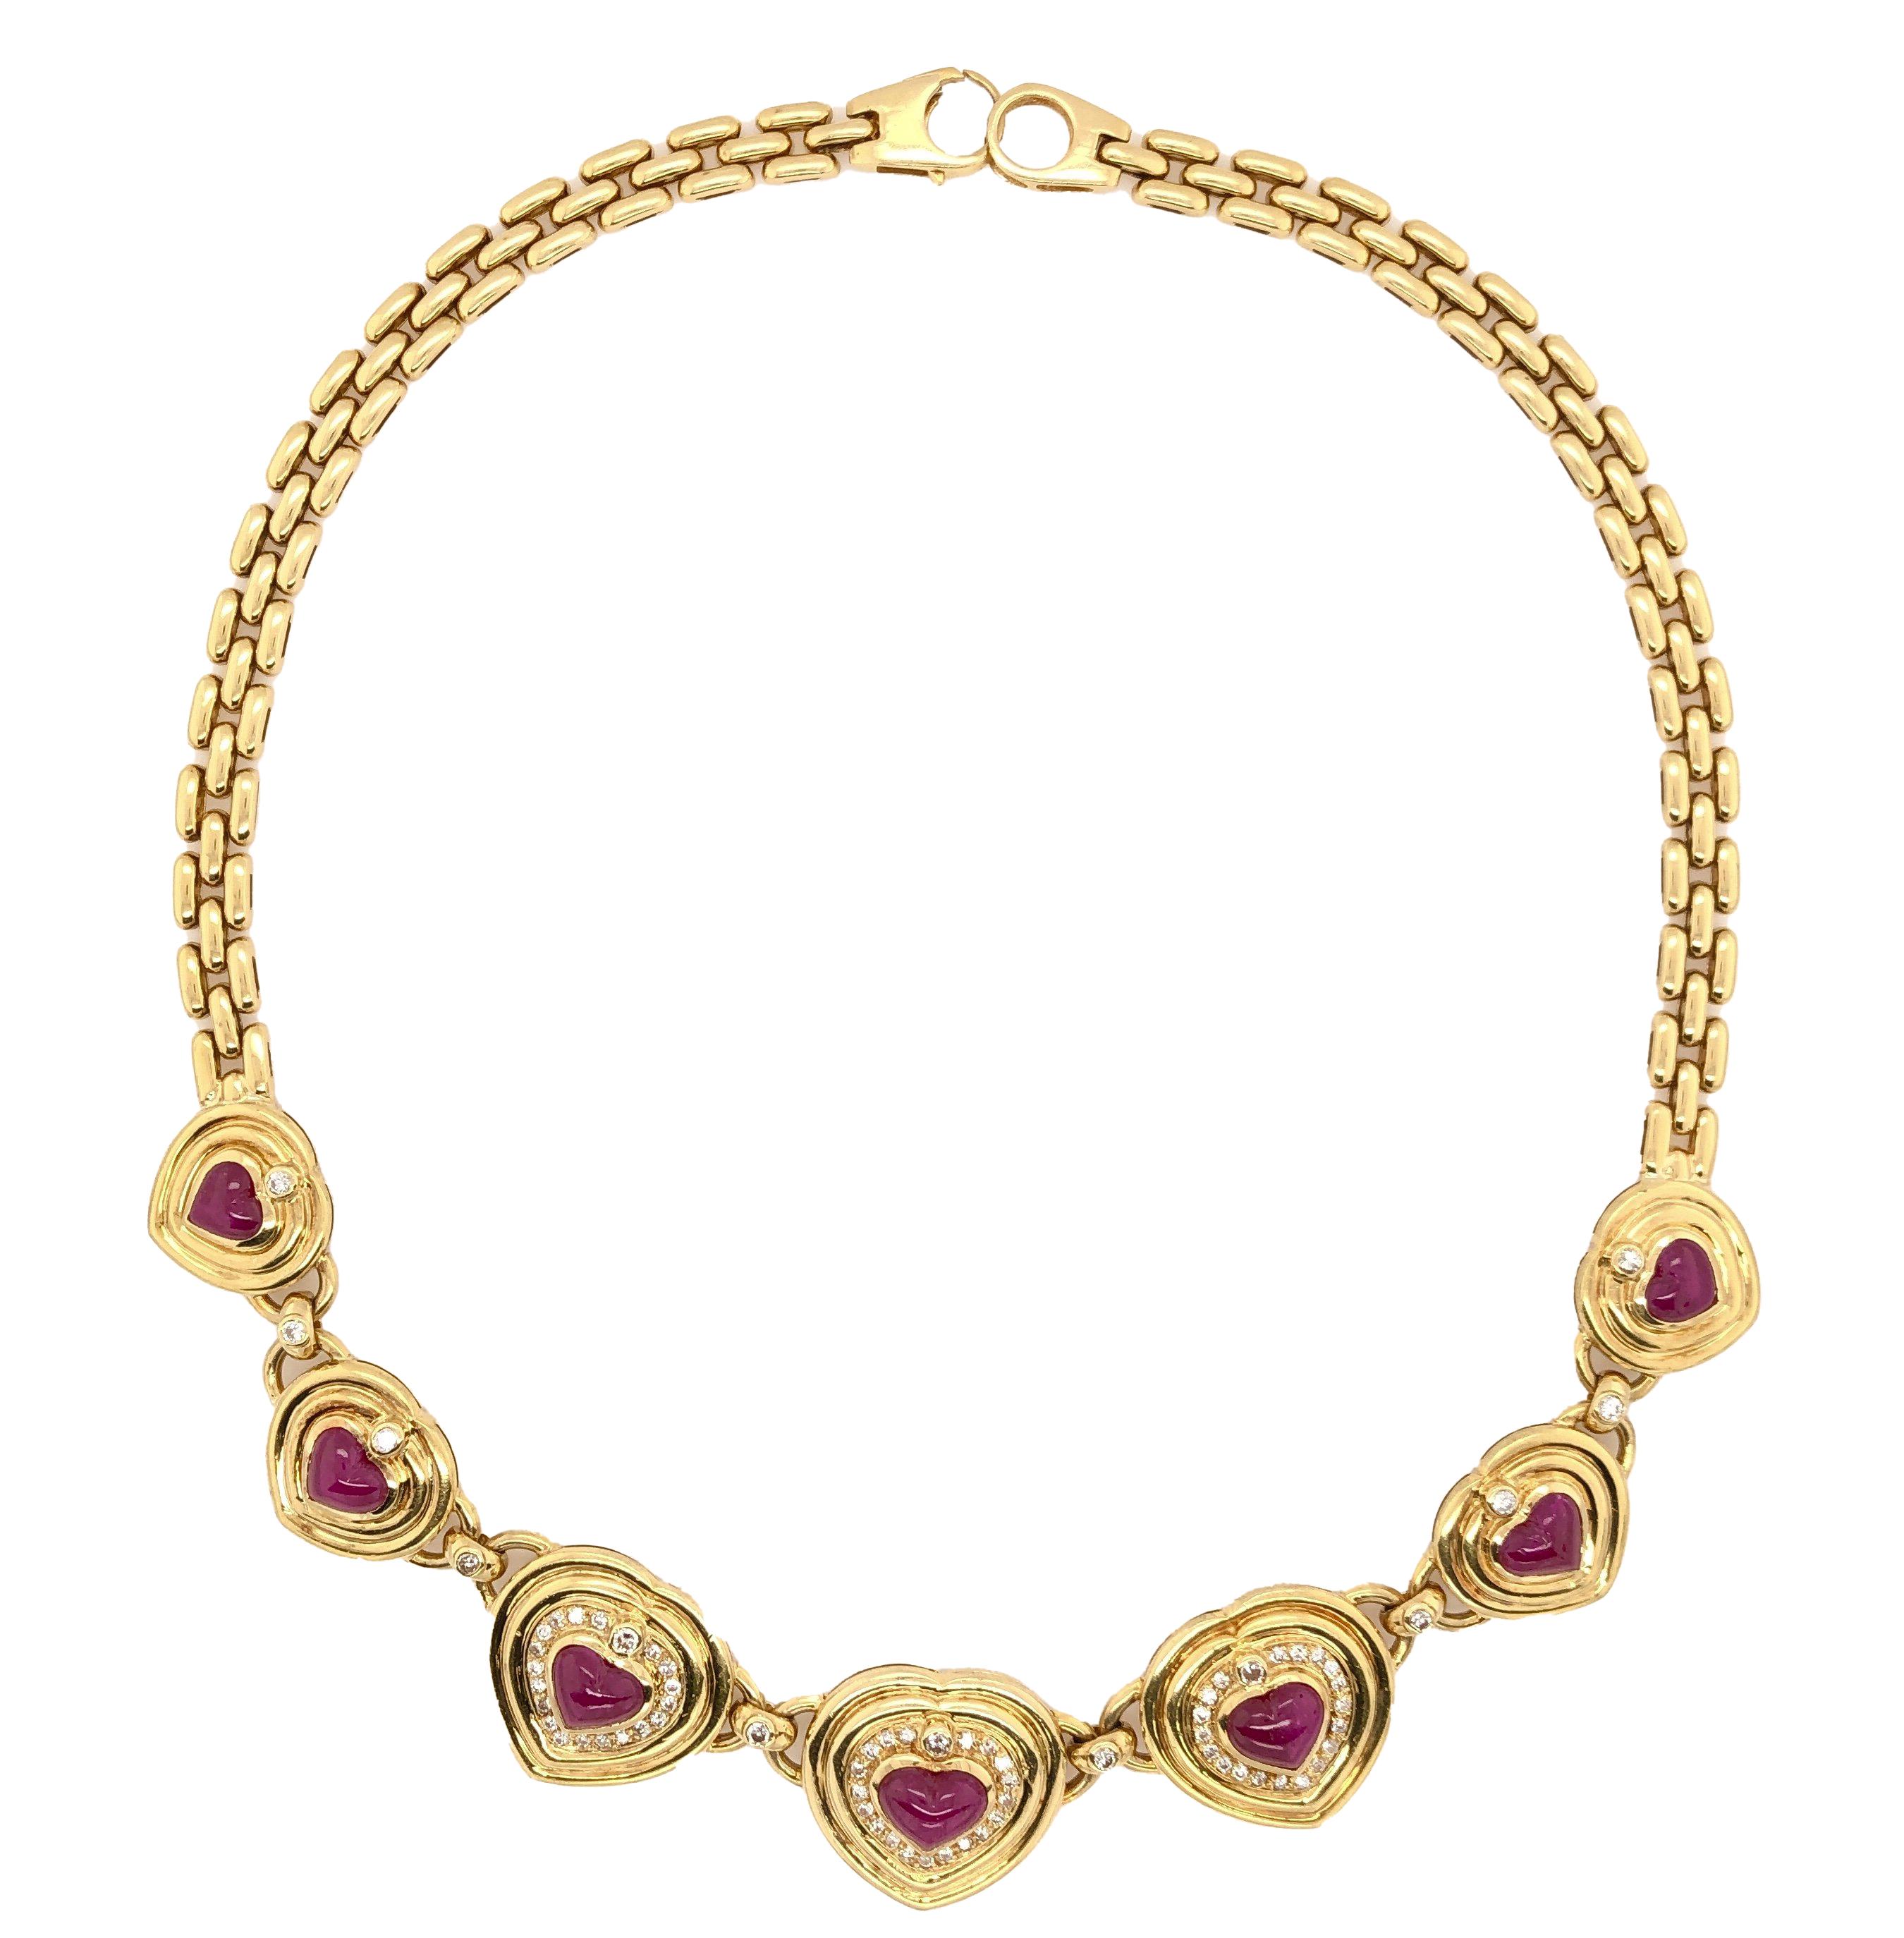 This one-of-a-kind vintage necklace is composed of seven large heart-shaped cabochon rubies, possessing a stunningly fine and vibrant red color, referred to as 'pigeon blood red', which amount to a total carat weight of 15. The single row of